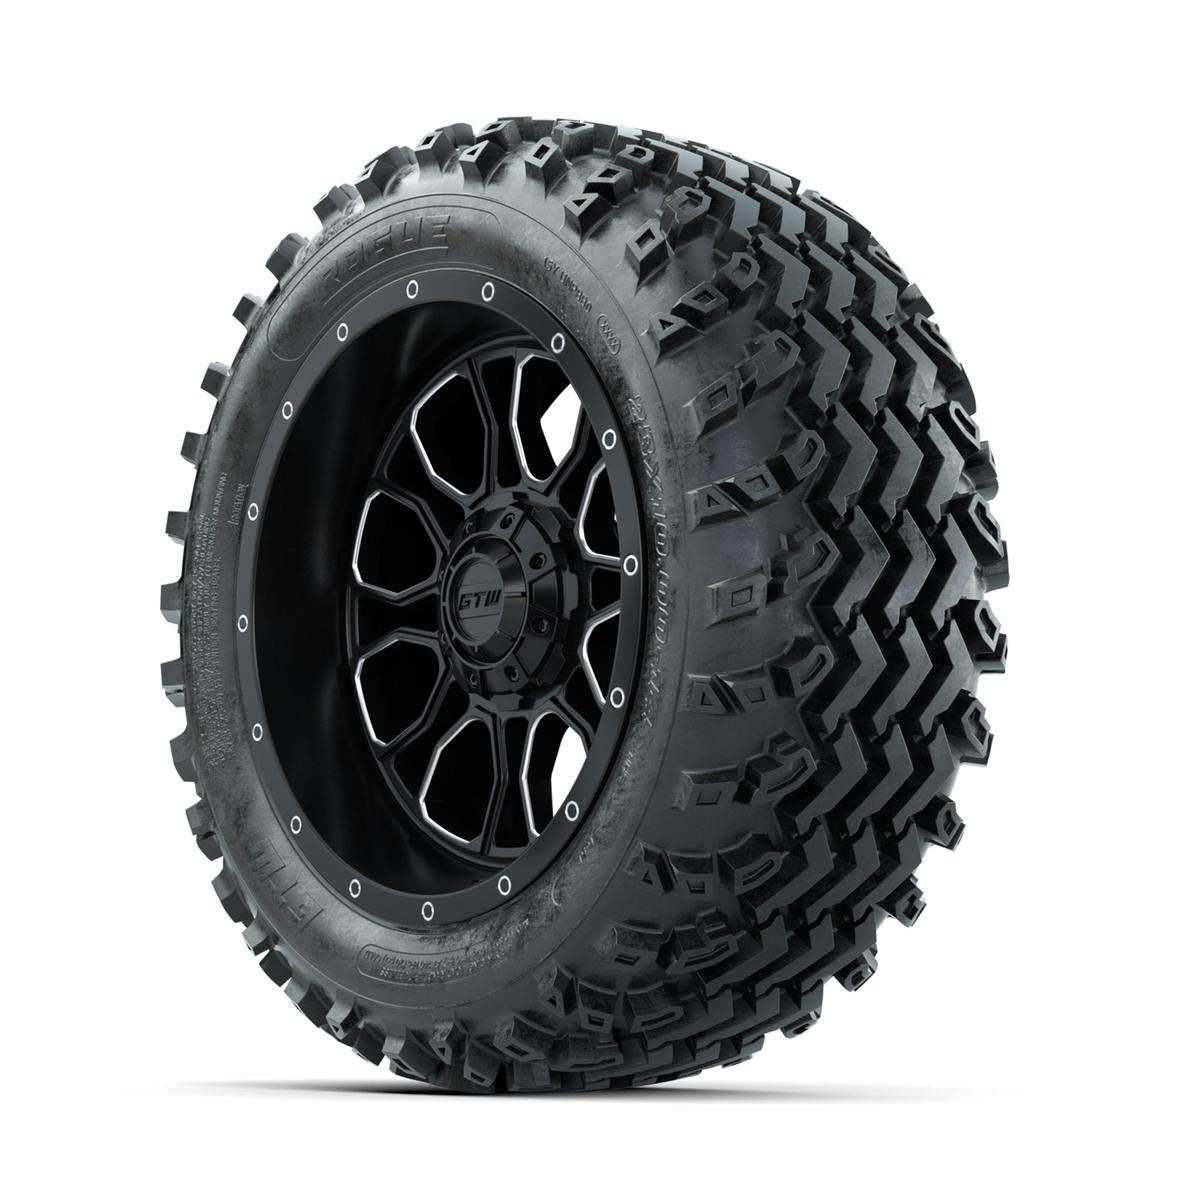 GTW Volt Machined/Black 14 in Wheels with 23x10.00-14 Rogue All Terrain Tires – Full Set